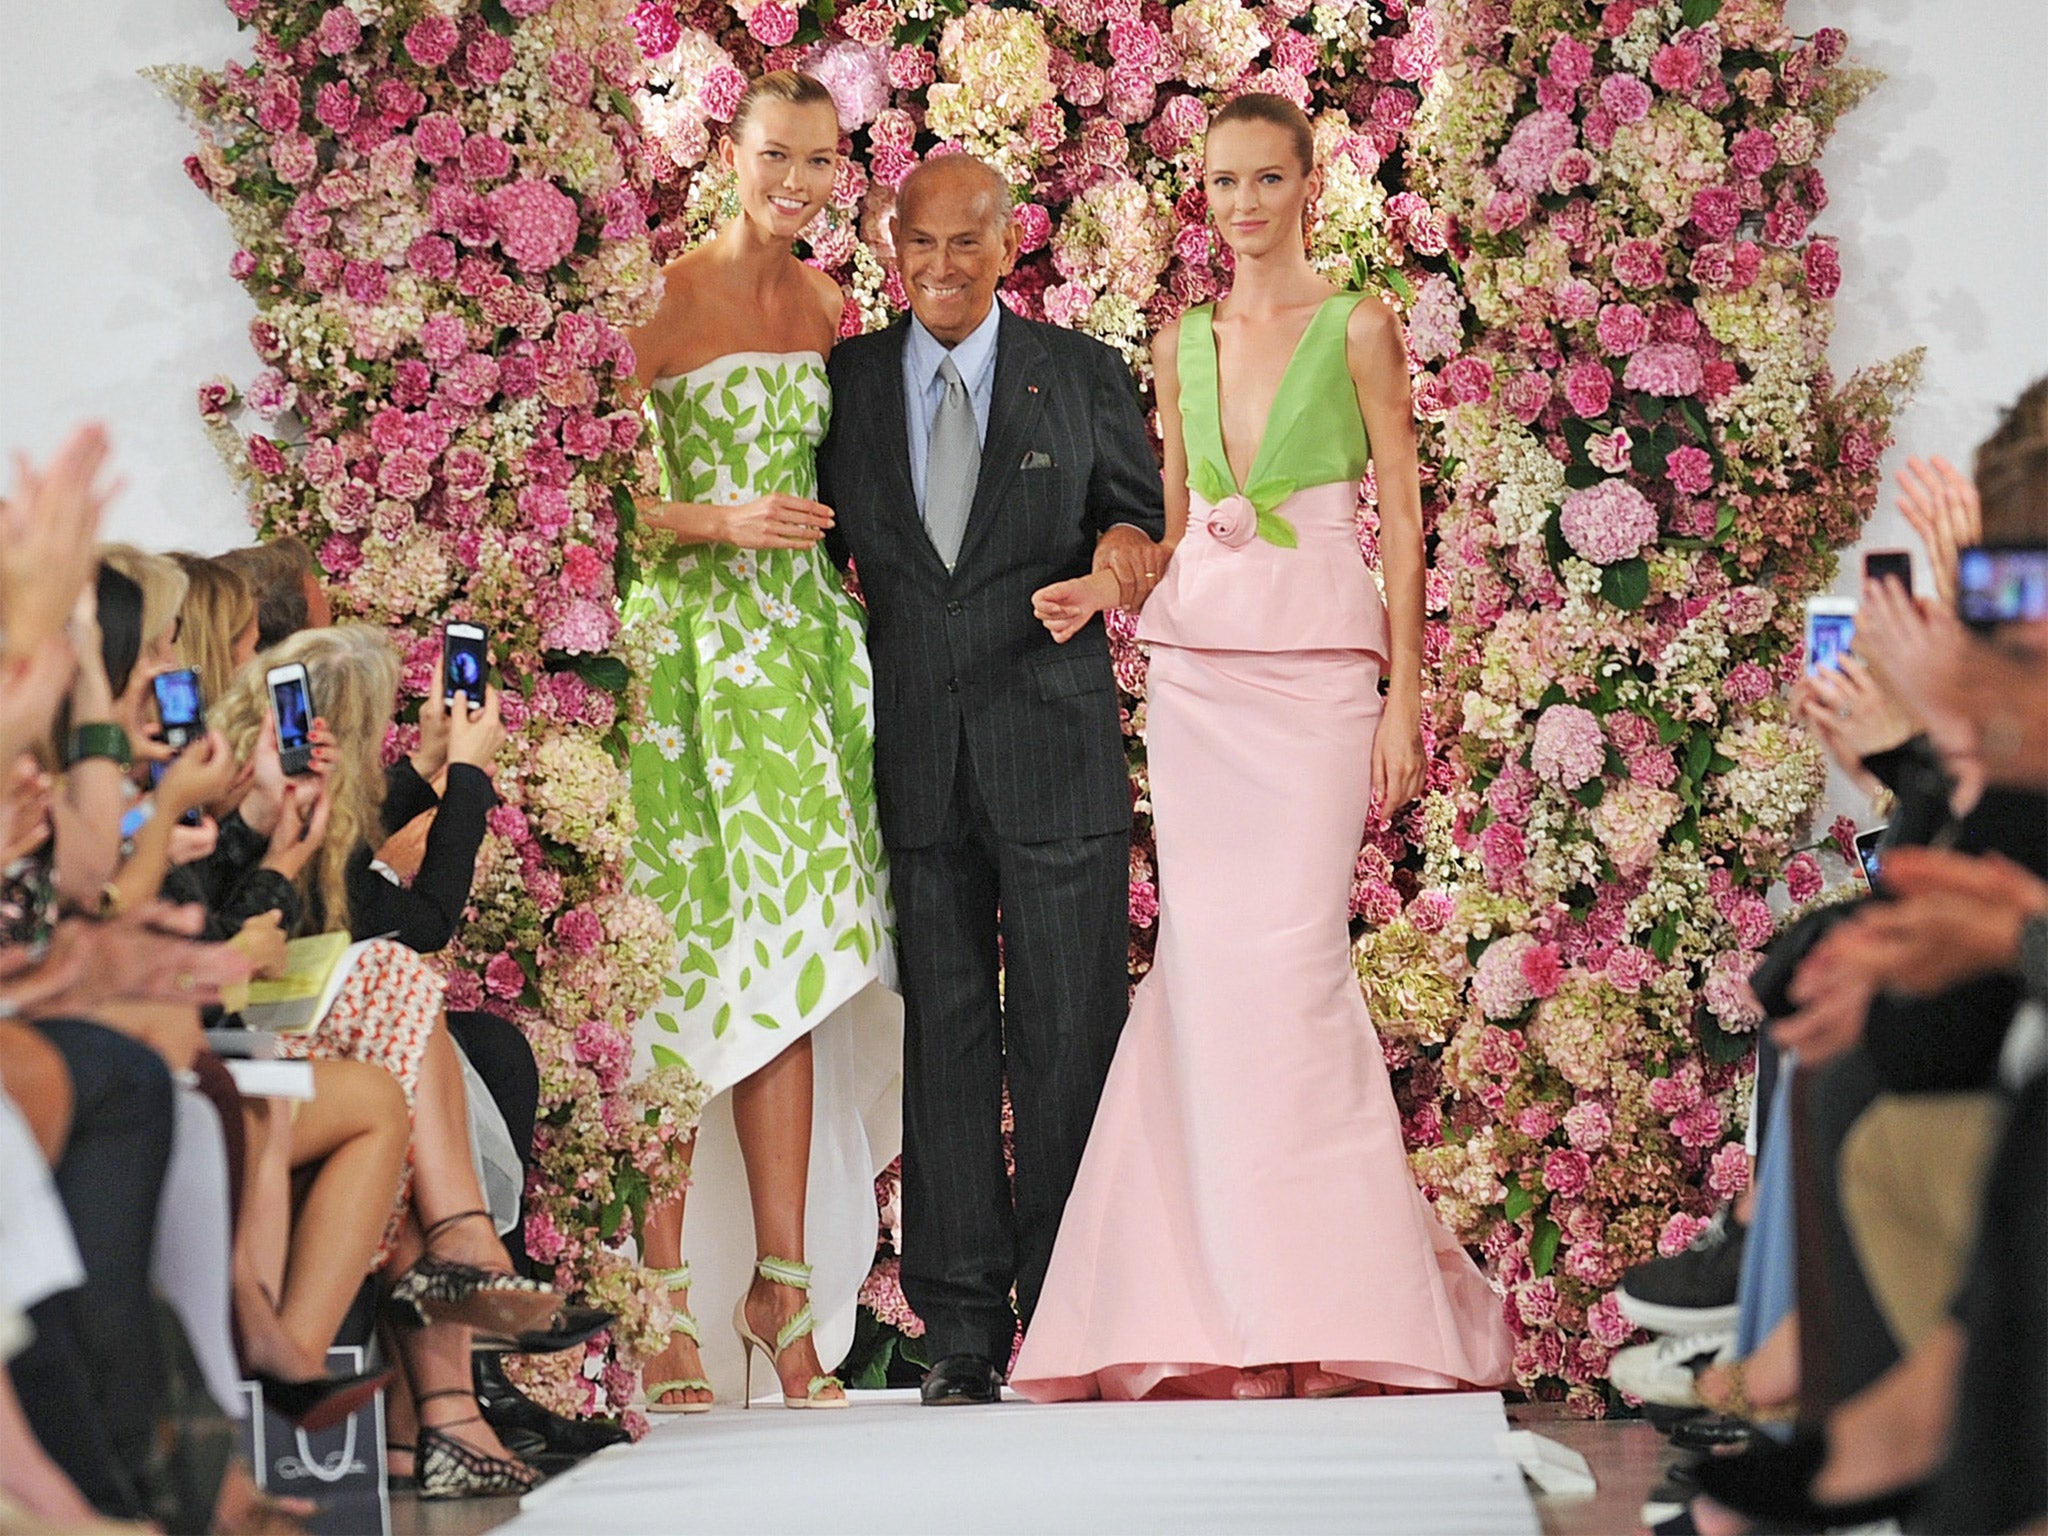 Designer Oscar de la Renta takes a bow after showing his Spring 2015 collection in September, his last show before his death